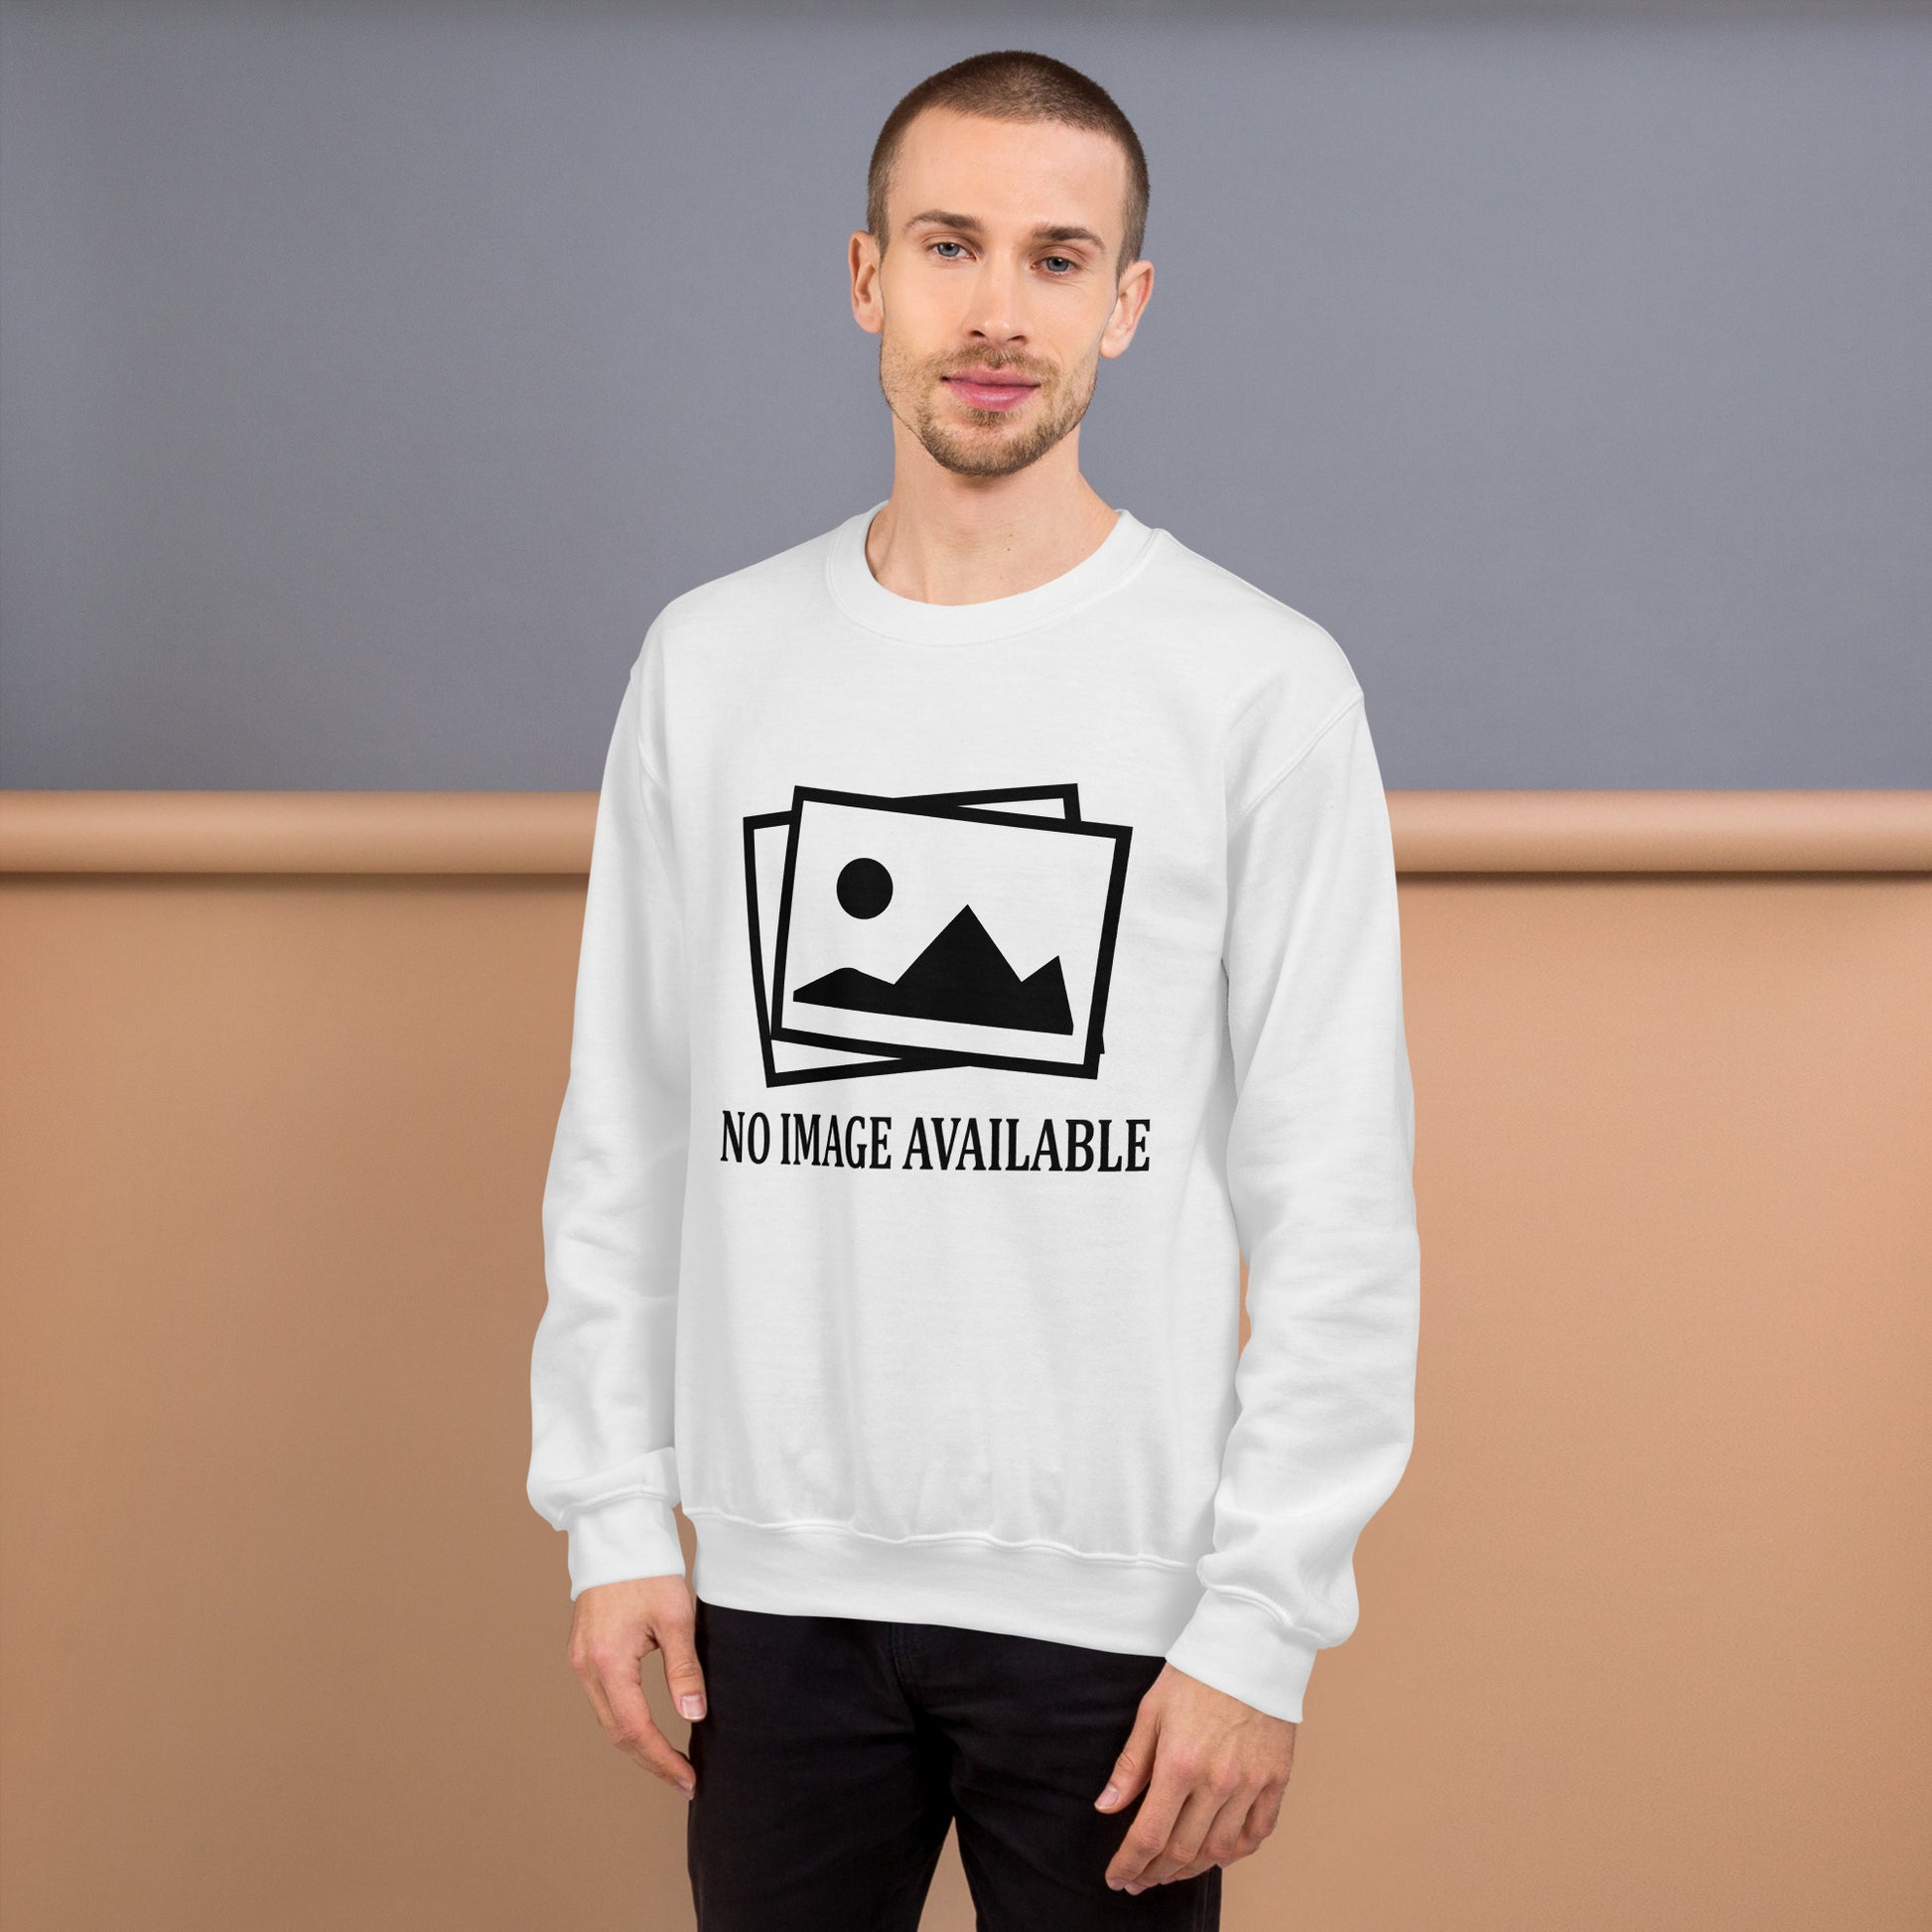 Men with white sweatshirt with image and text "no image available"